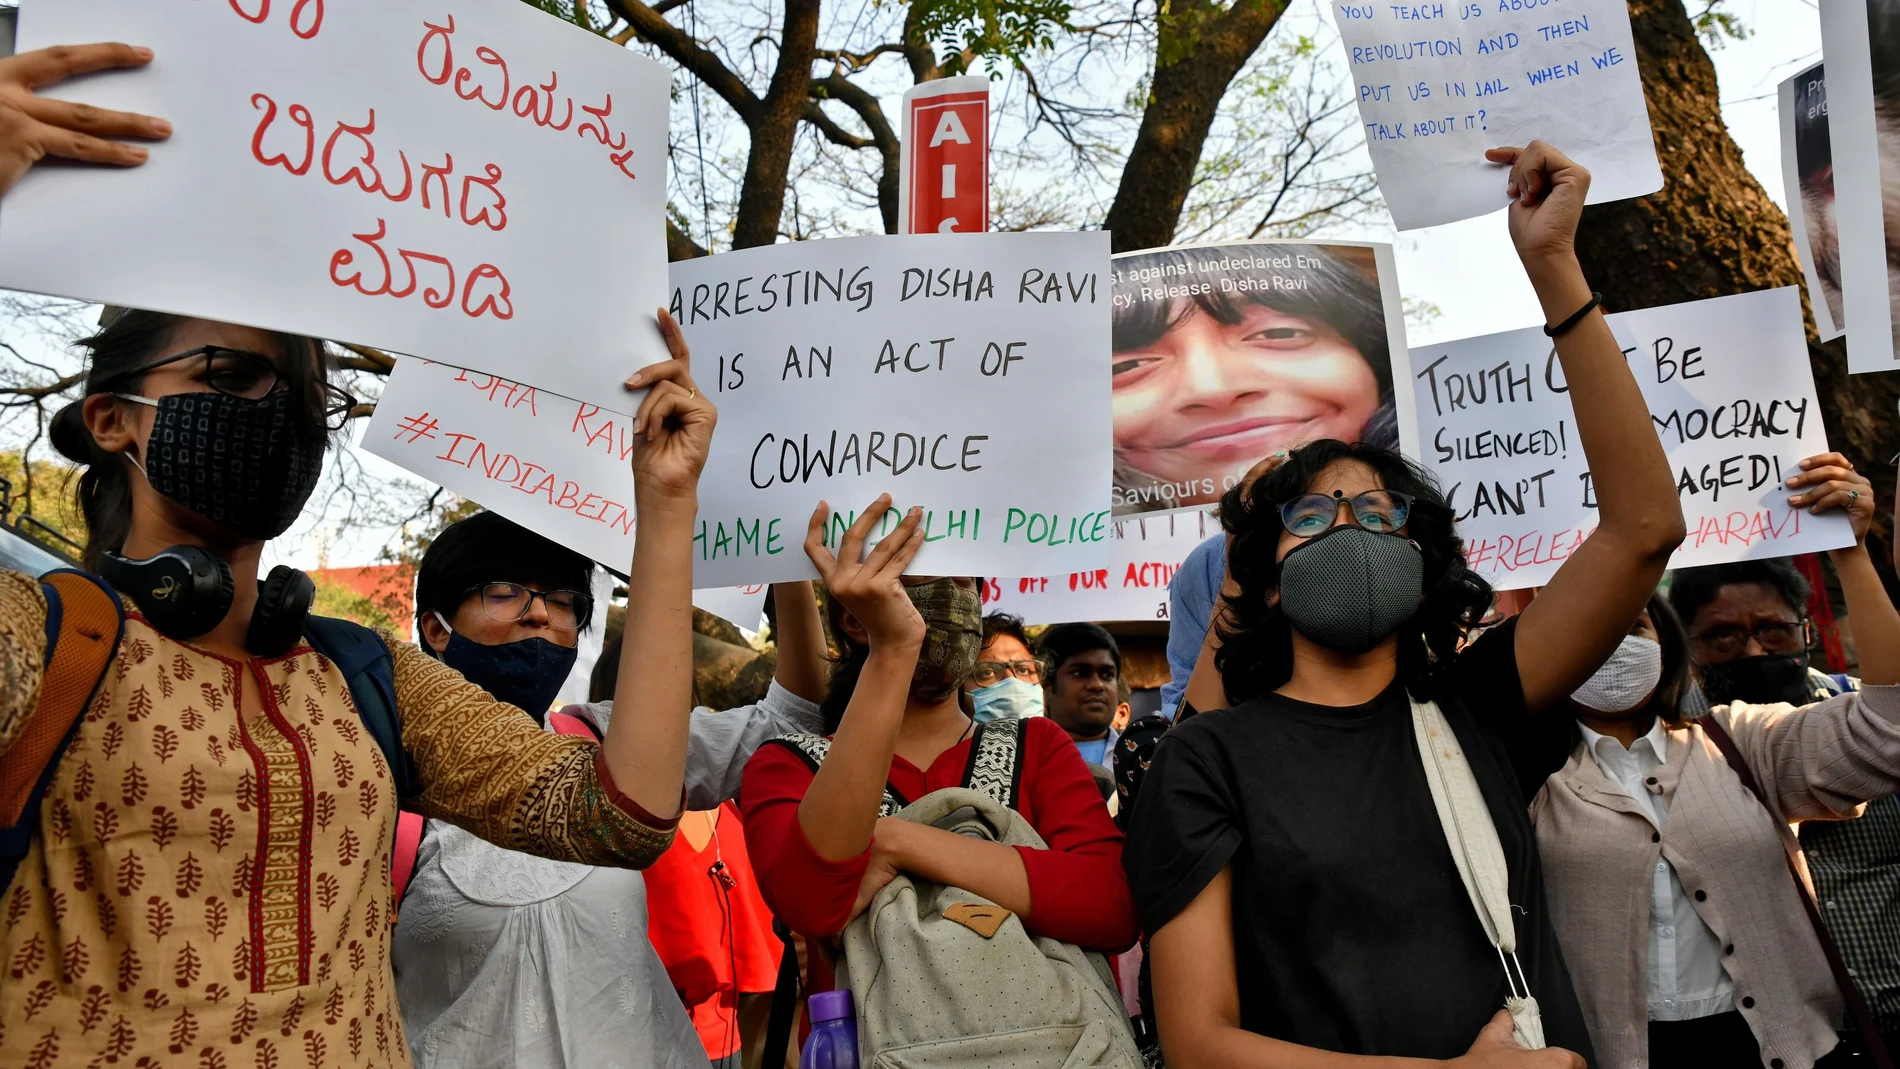 People hold placards during a protest against the arrest of 22-year-old climate activist Disha Ravi, in Bengaluru, India, February 15, 2021. REUTERS/Samuel Rajkumar